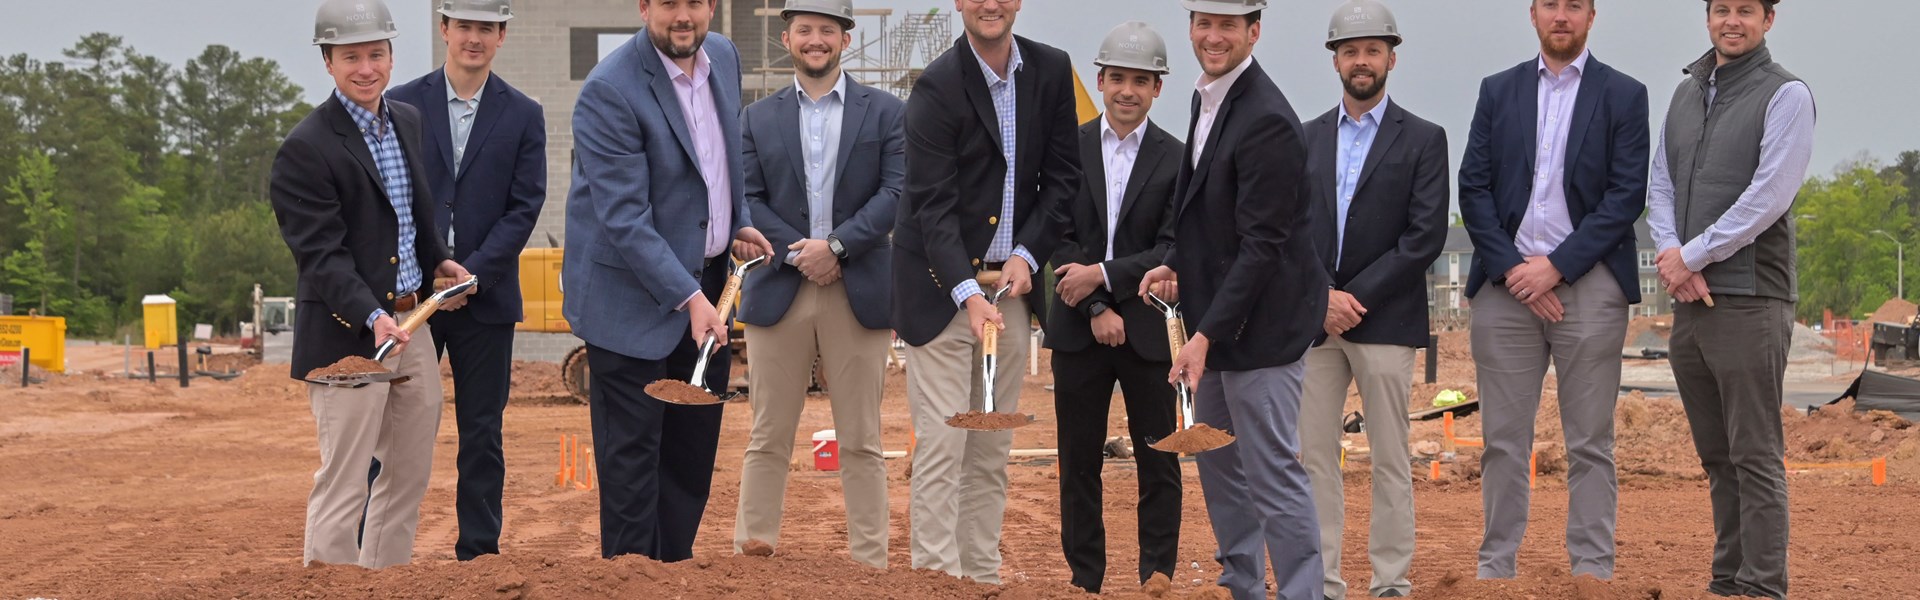 Crescent Communities Hosts Groundbreaking for New Multifamily Community in the Triangle